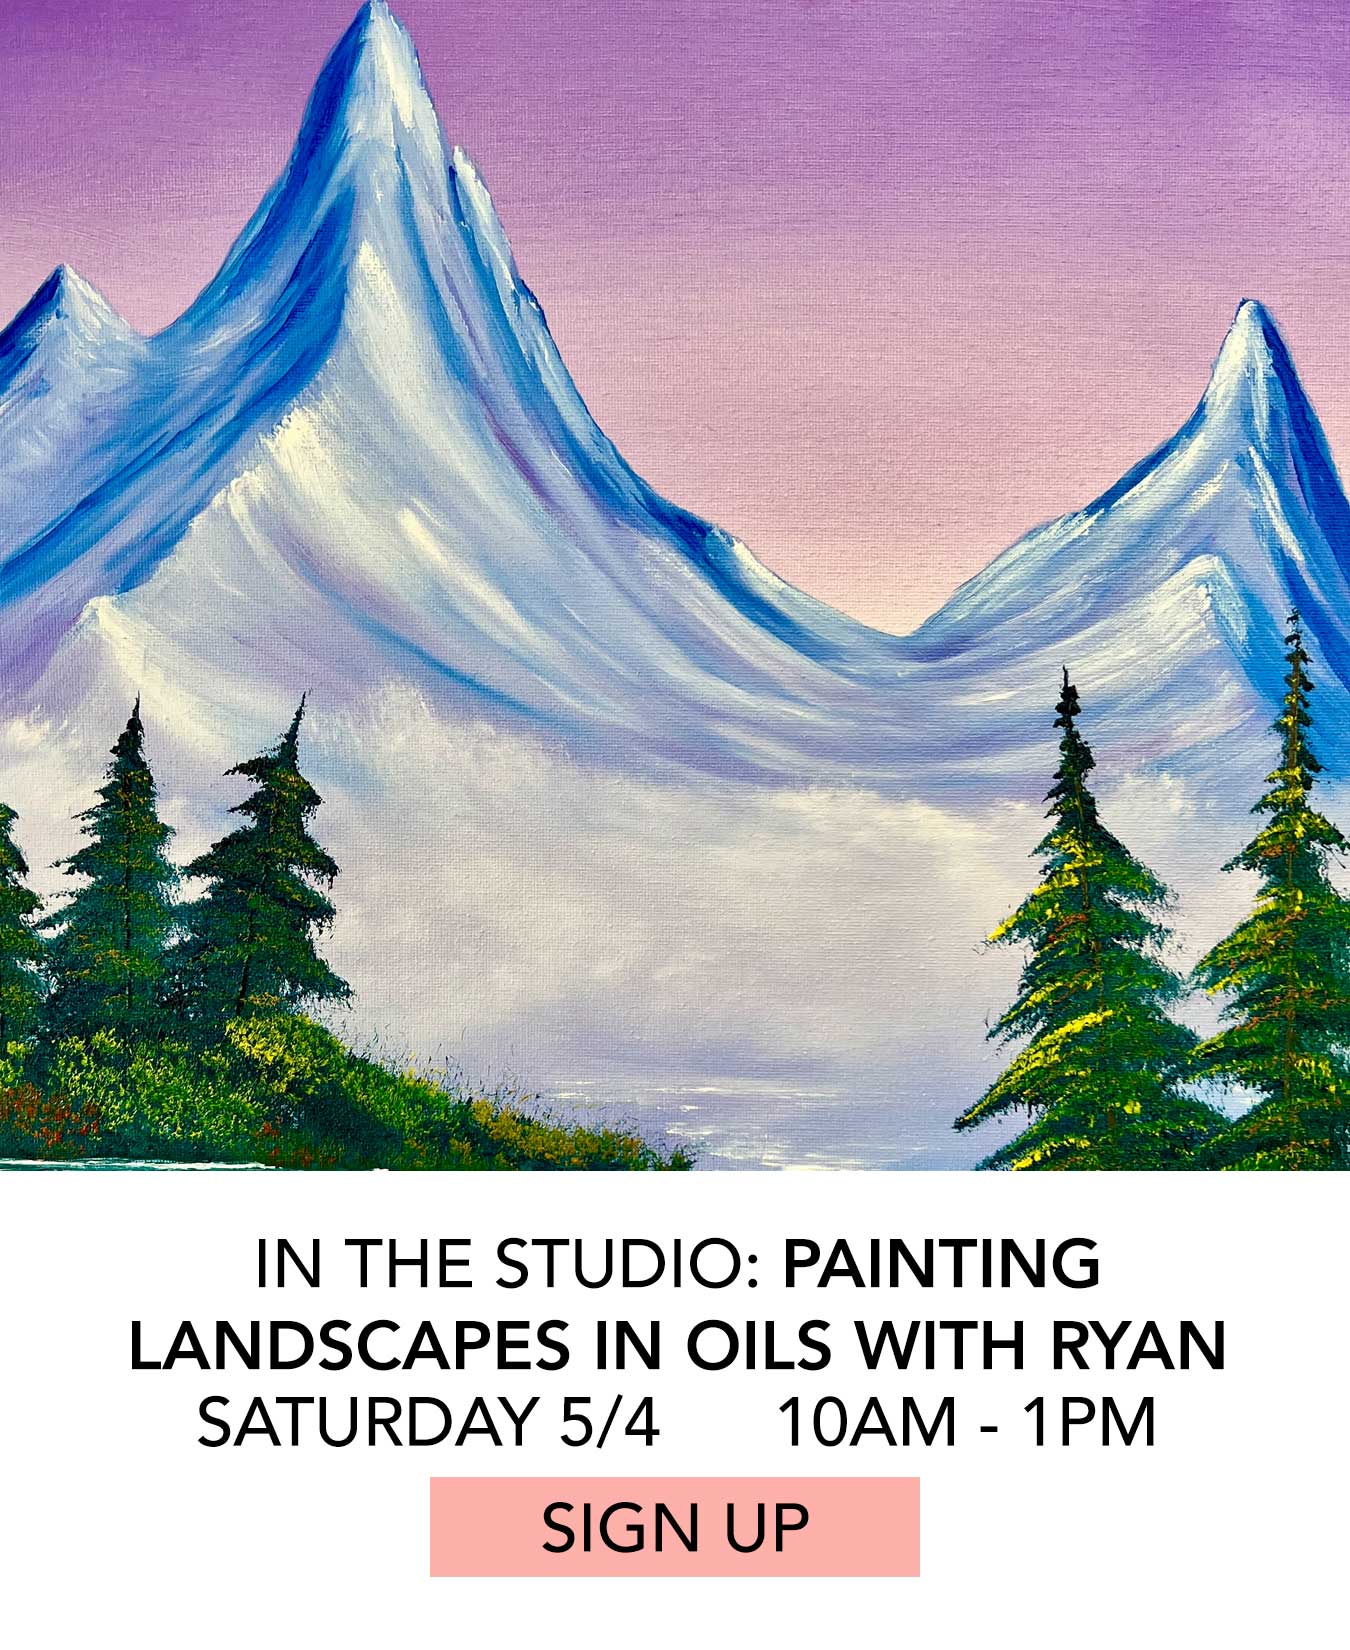 In the Studio: Painting Landscapes in Oils with Ryan. Saturday 5/4 from 10:00am to 1:00pm. Click to Sign Up.